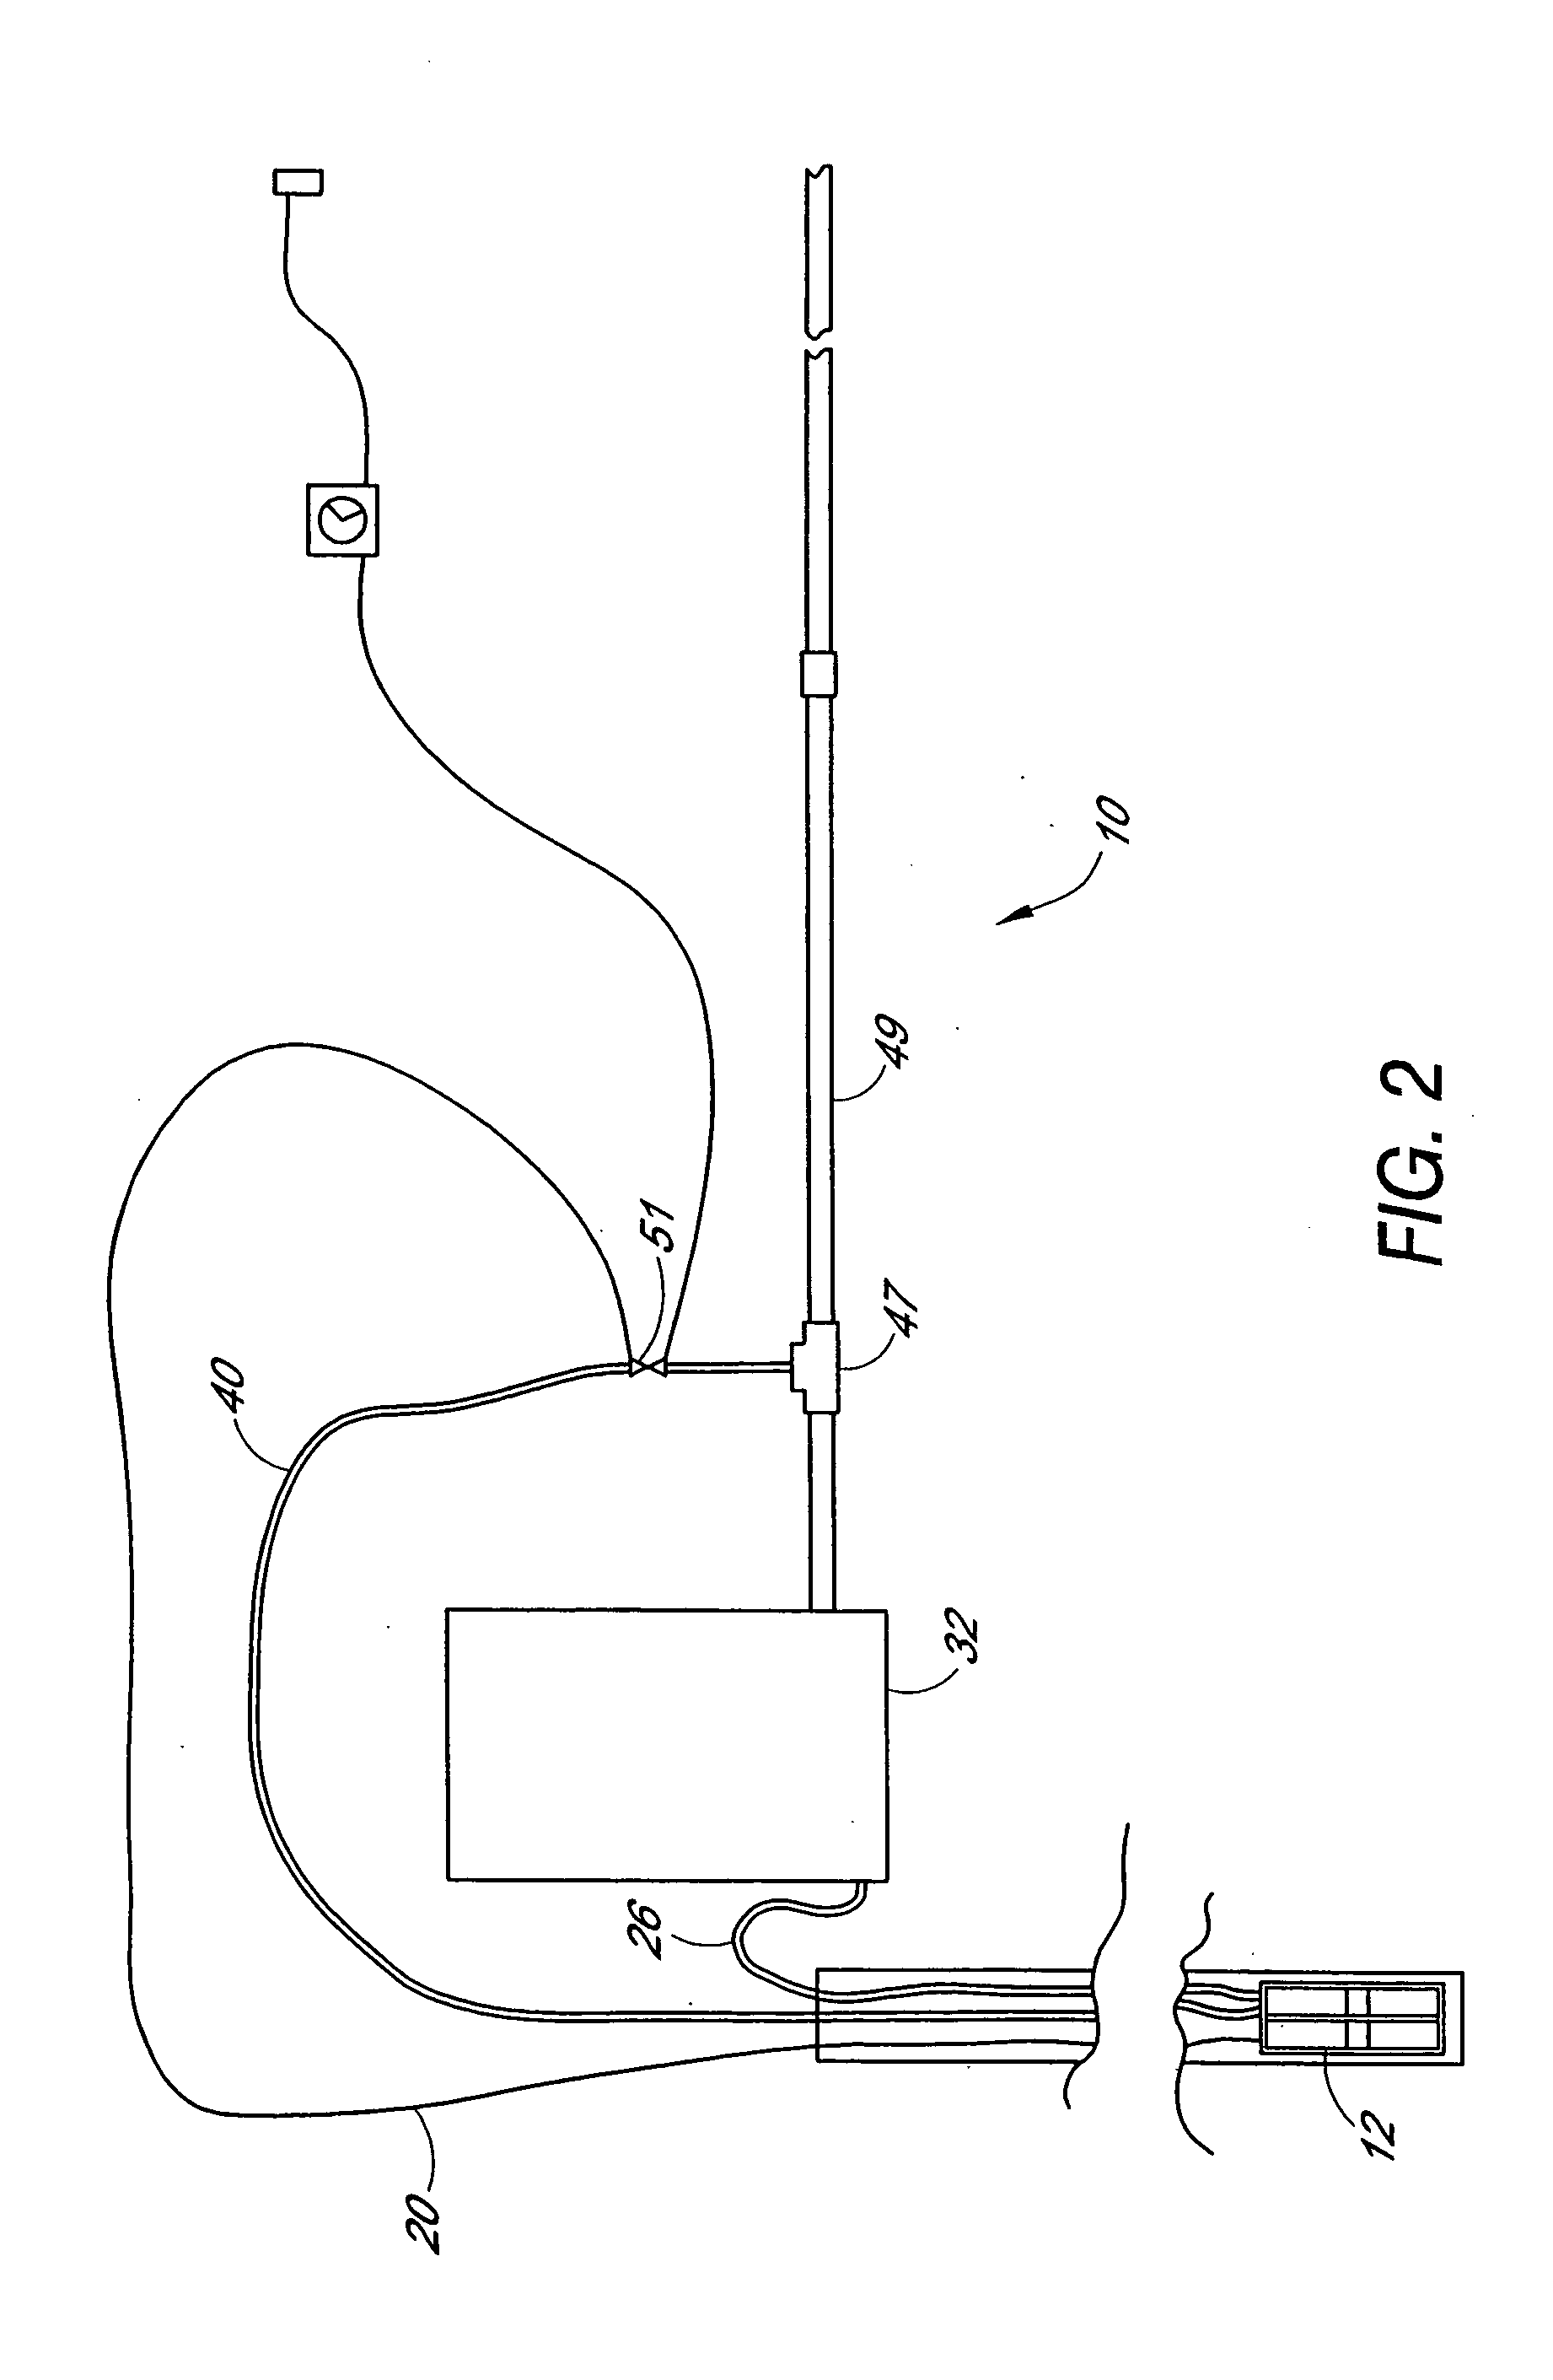 Method and system for filtering sediment-bearing fluids